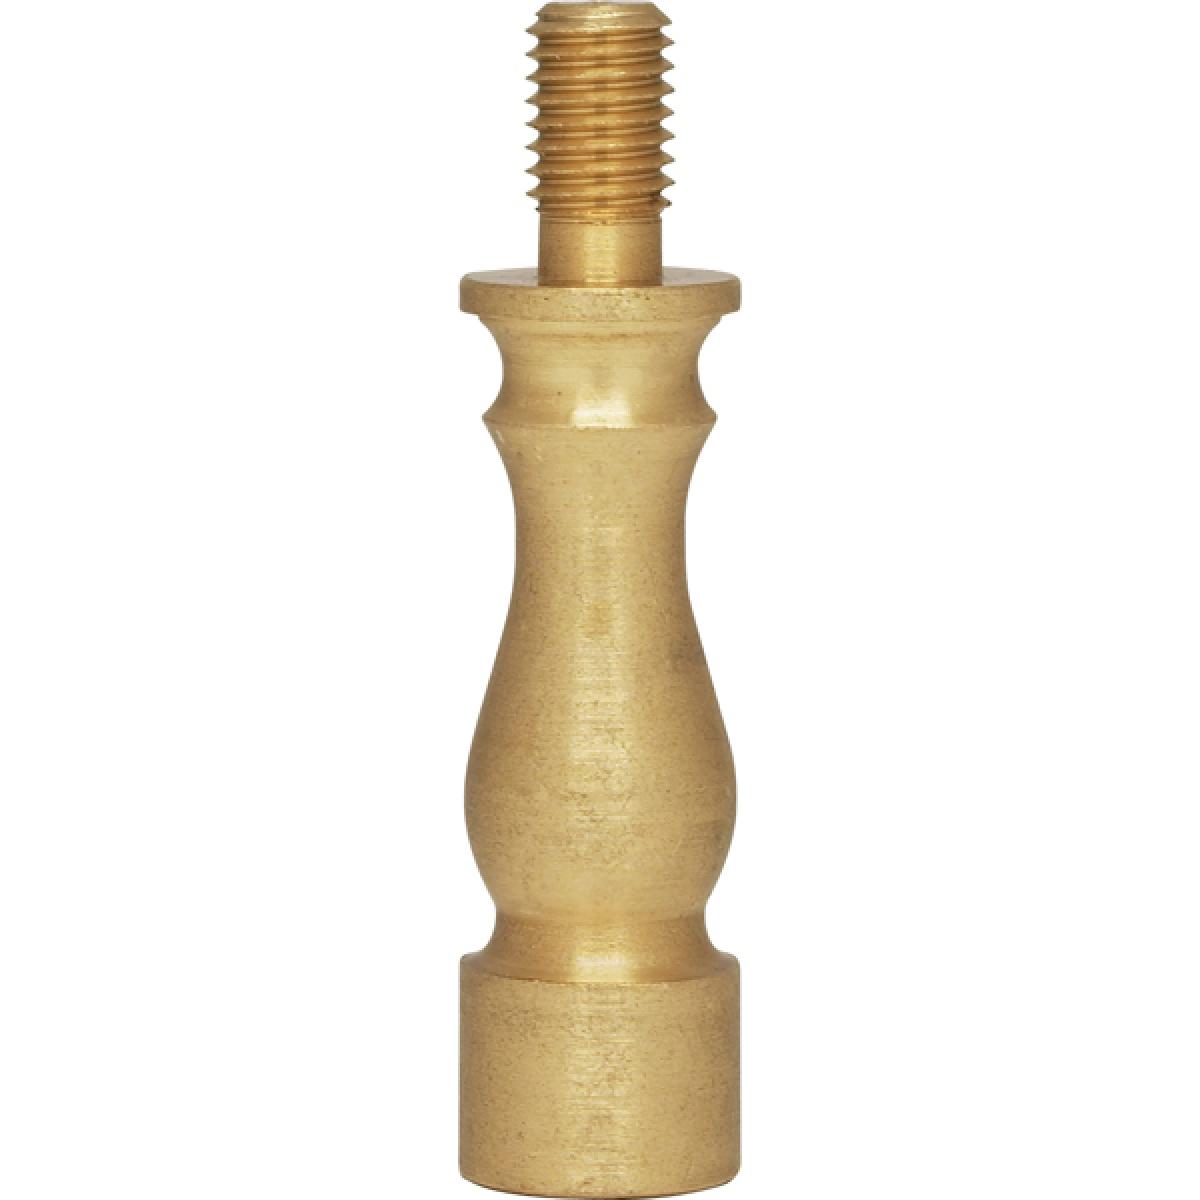 Satco 90-1589 Solid Brass Riser 1/4-27 Burnished And Lacquered 1-1/2" Height